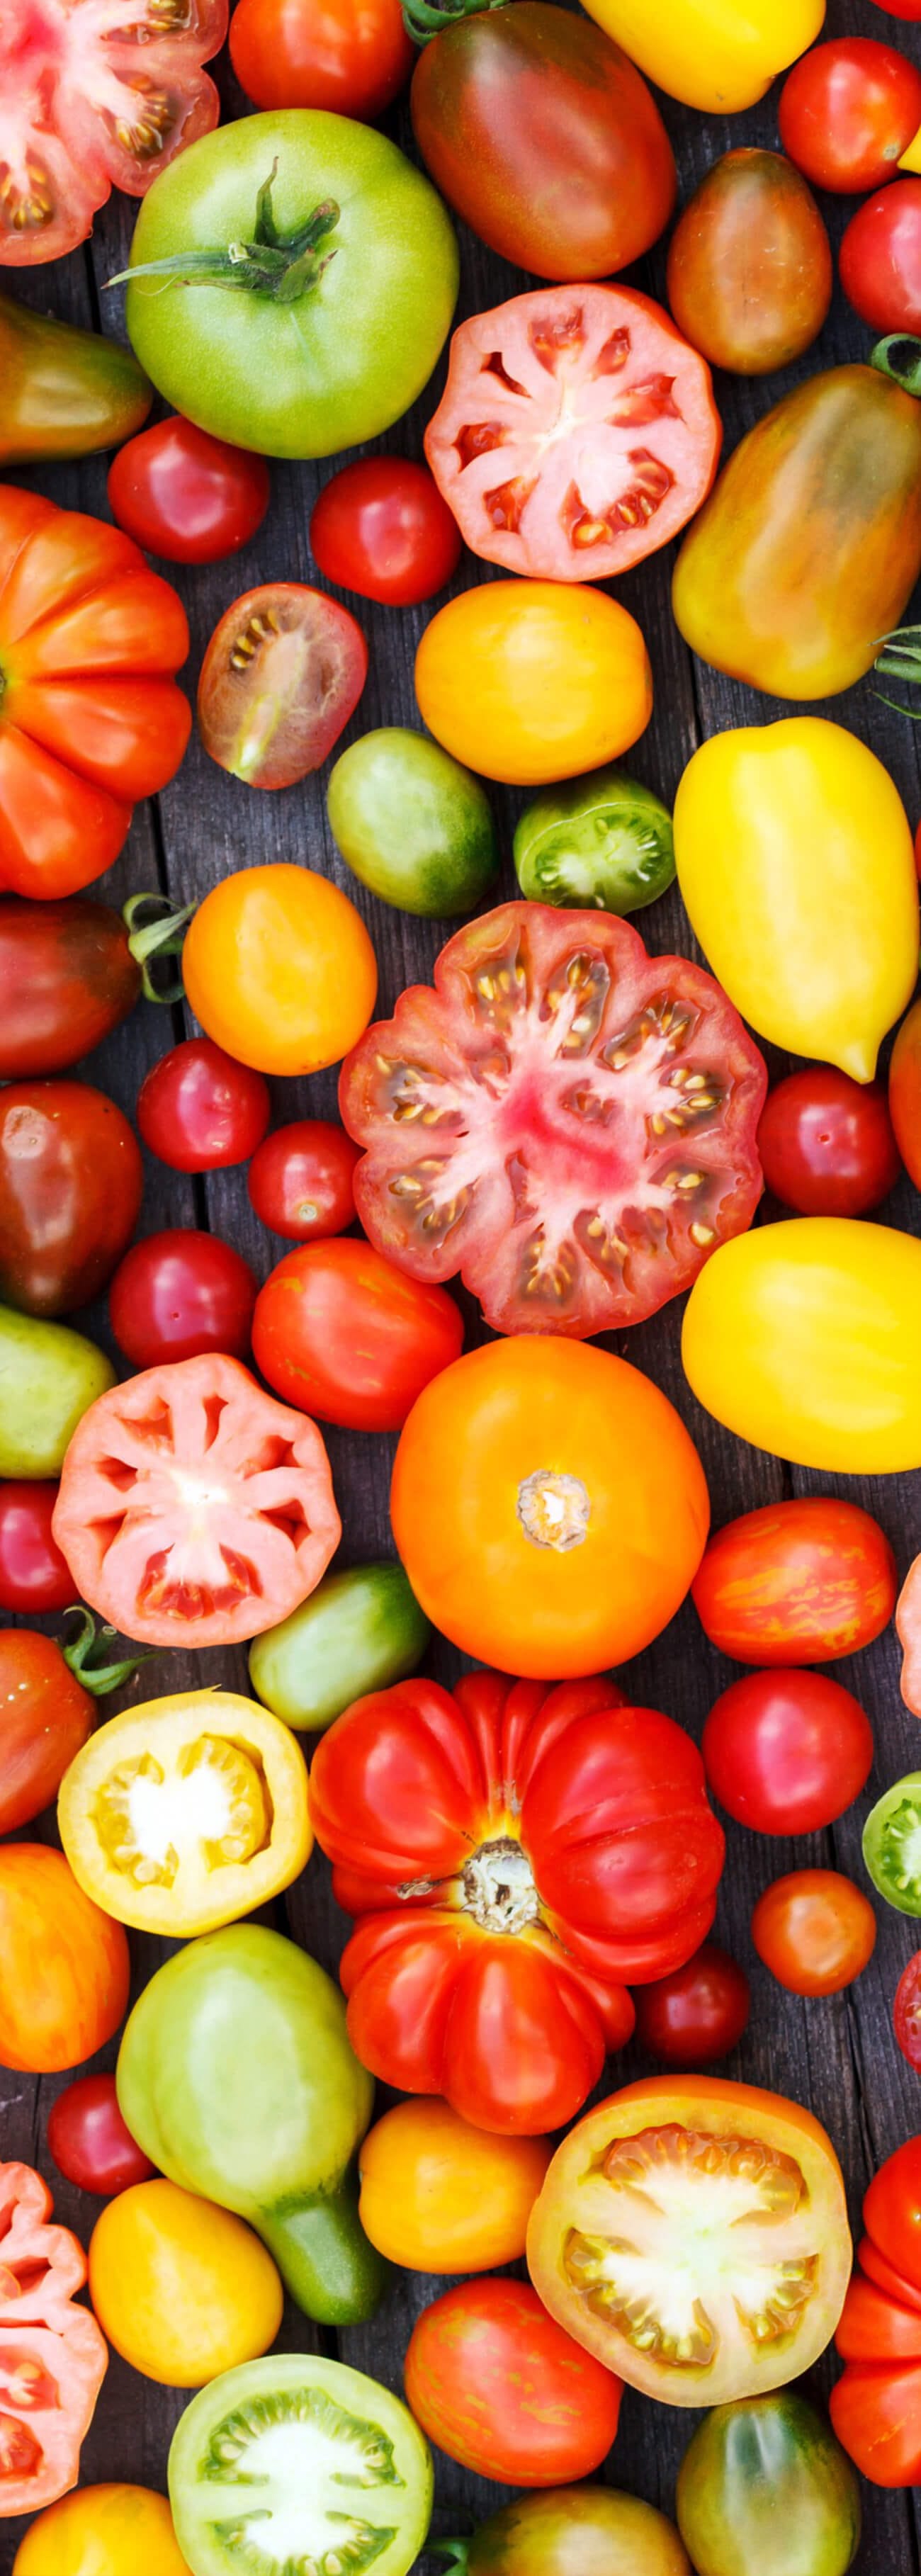 overhead image of various colored tomatoes